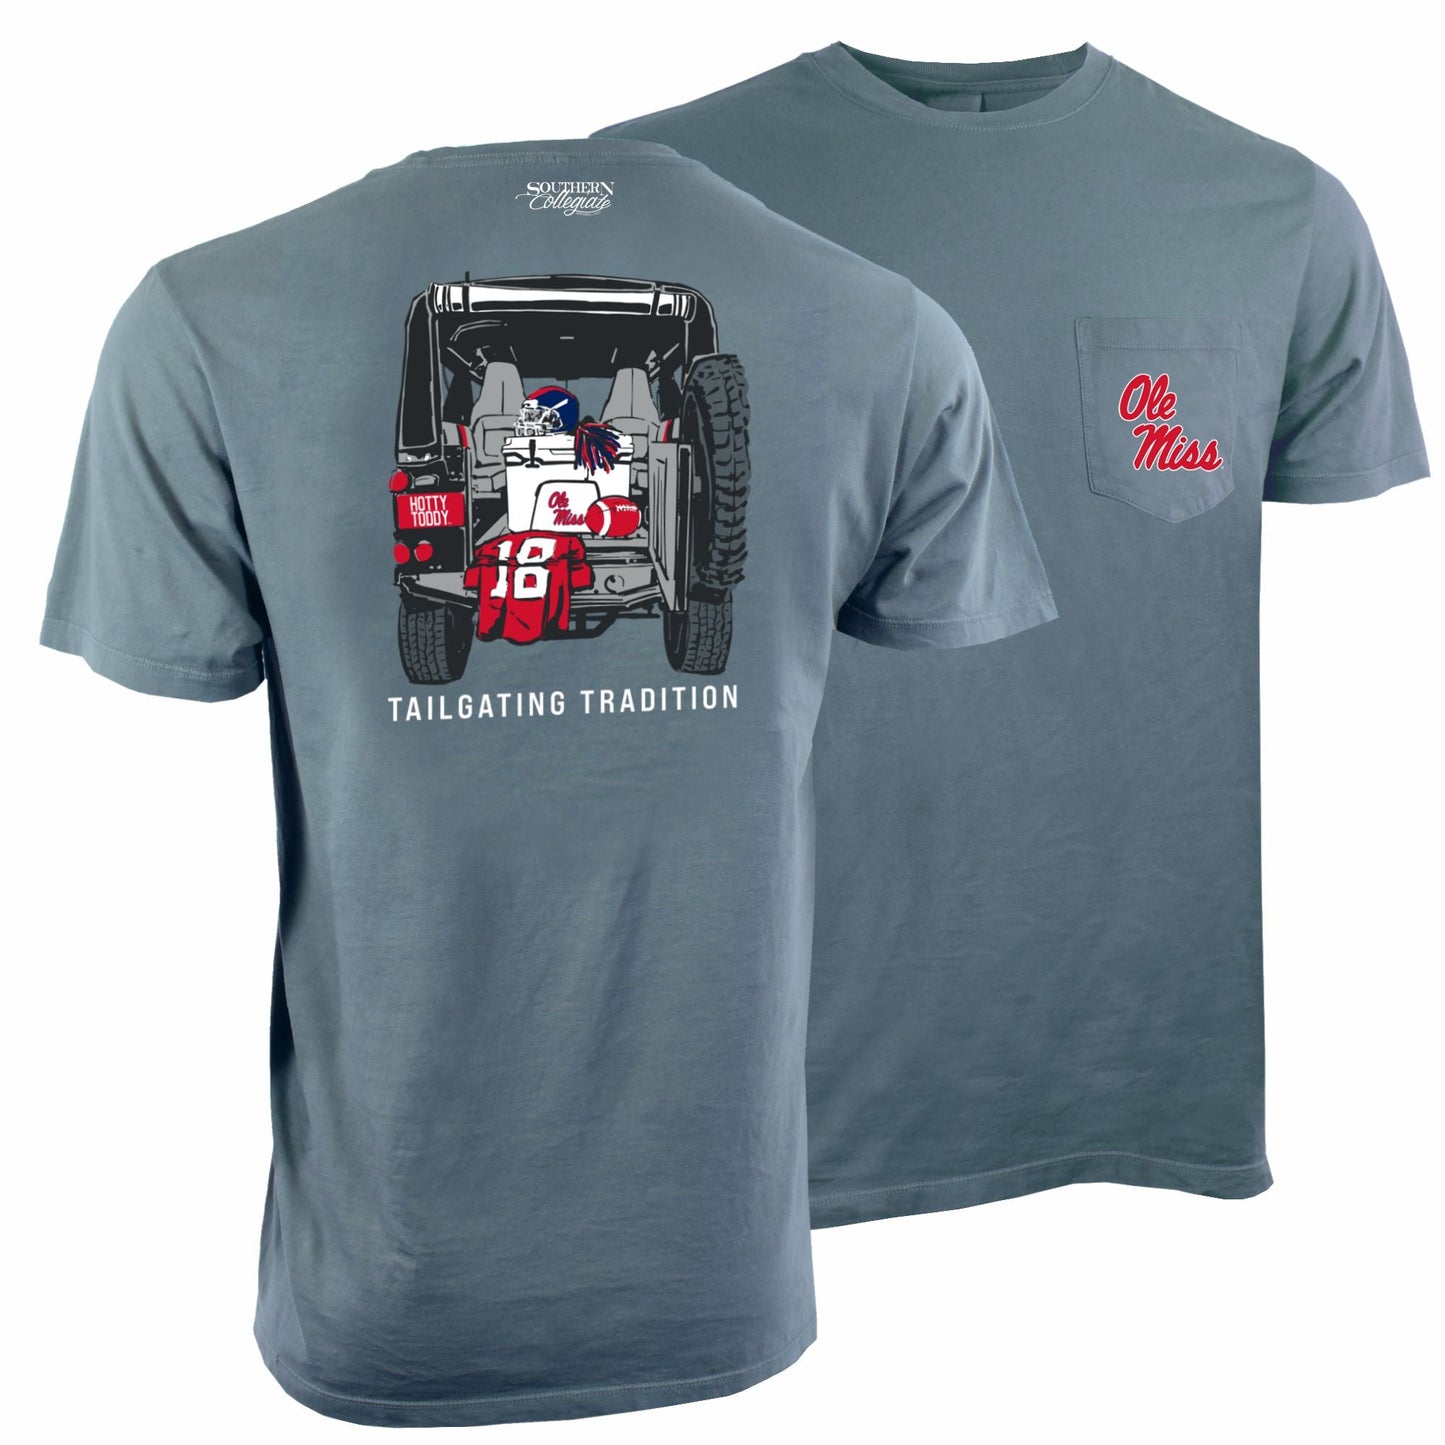 Southern Collegiate Men's Tailgating Tradition S/S T-Shirt